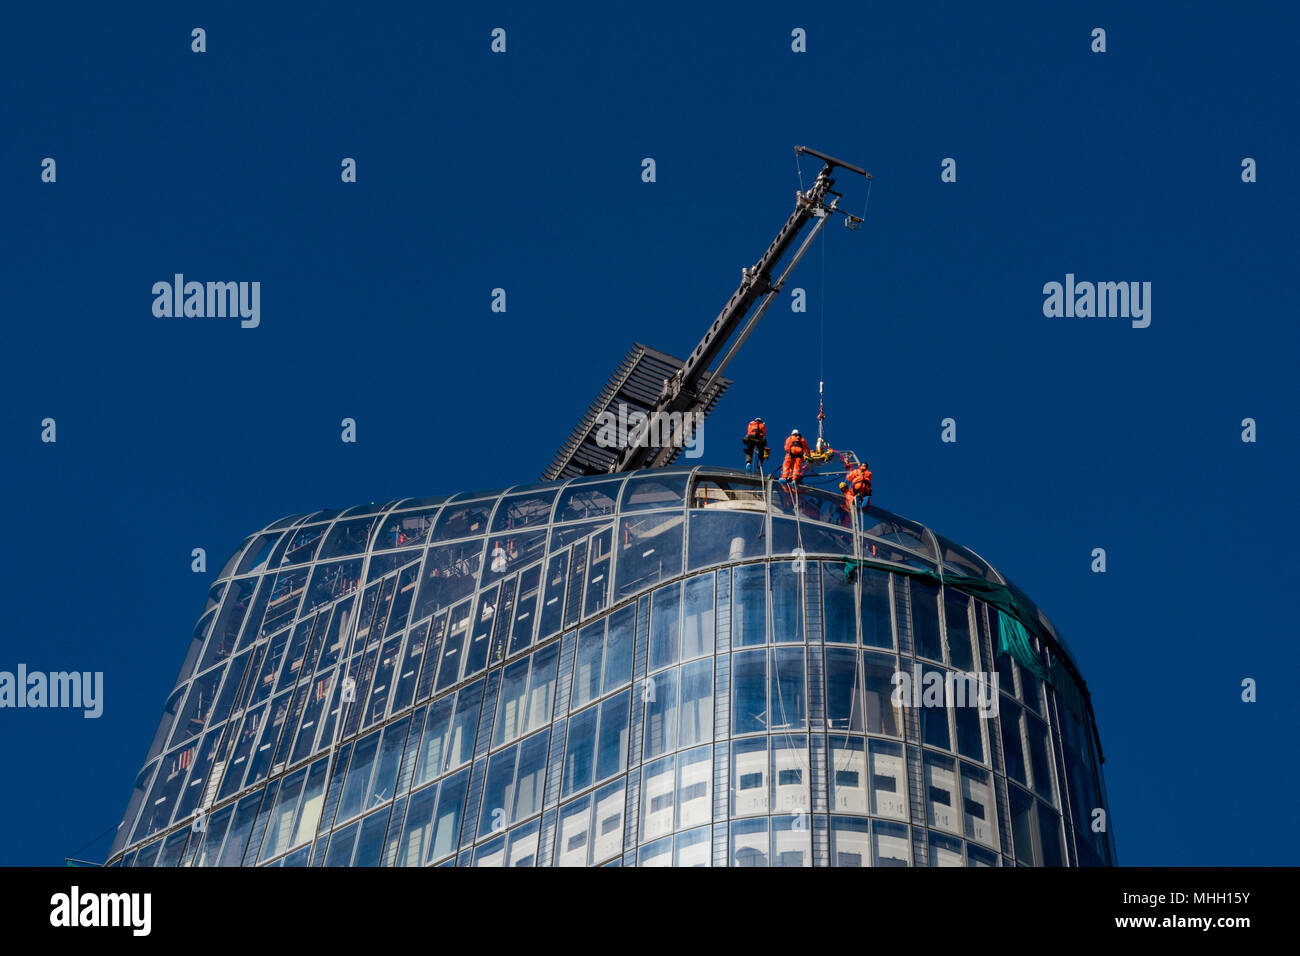 London, UK. 1st May, 2018. Workers take advantage of the clear calm weather in central London to work on the outside of the new apartment block at number 1 Blackfriars in central London. Clear blue skies over the capital city enable construction workers or riggers to work on the outside of a very tall new building at number one Blackfriars. Serious head for heights as workers hang from the outside and top of a new block of apartments in central London. Credit: Steve Hawkins Photography/Alamy Live News Stock Photo